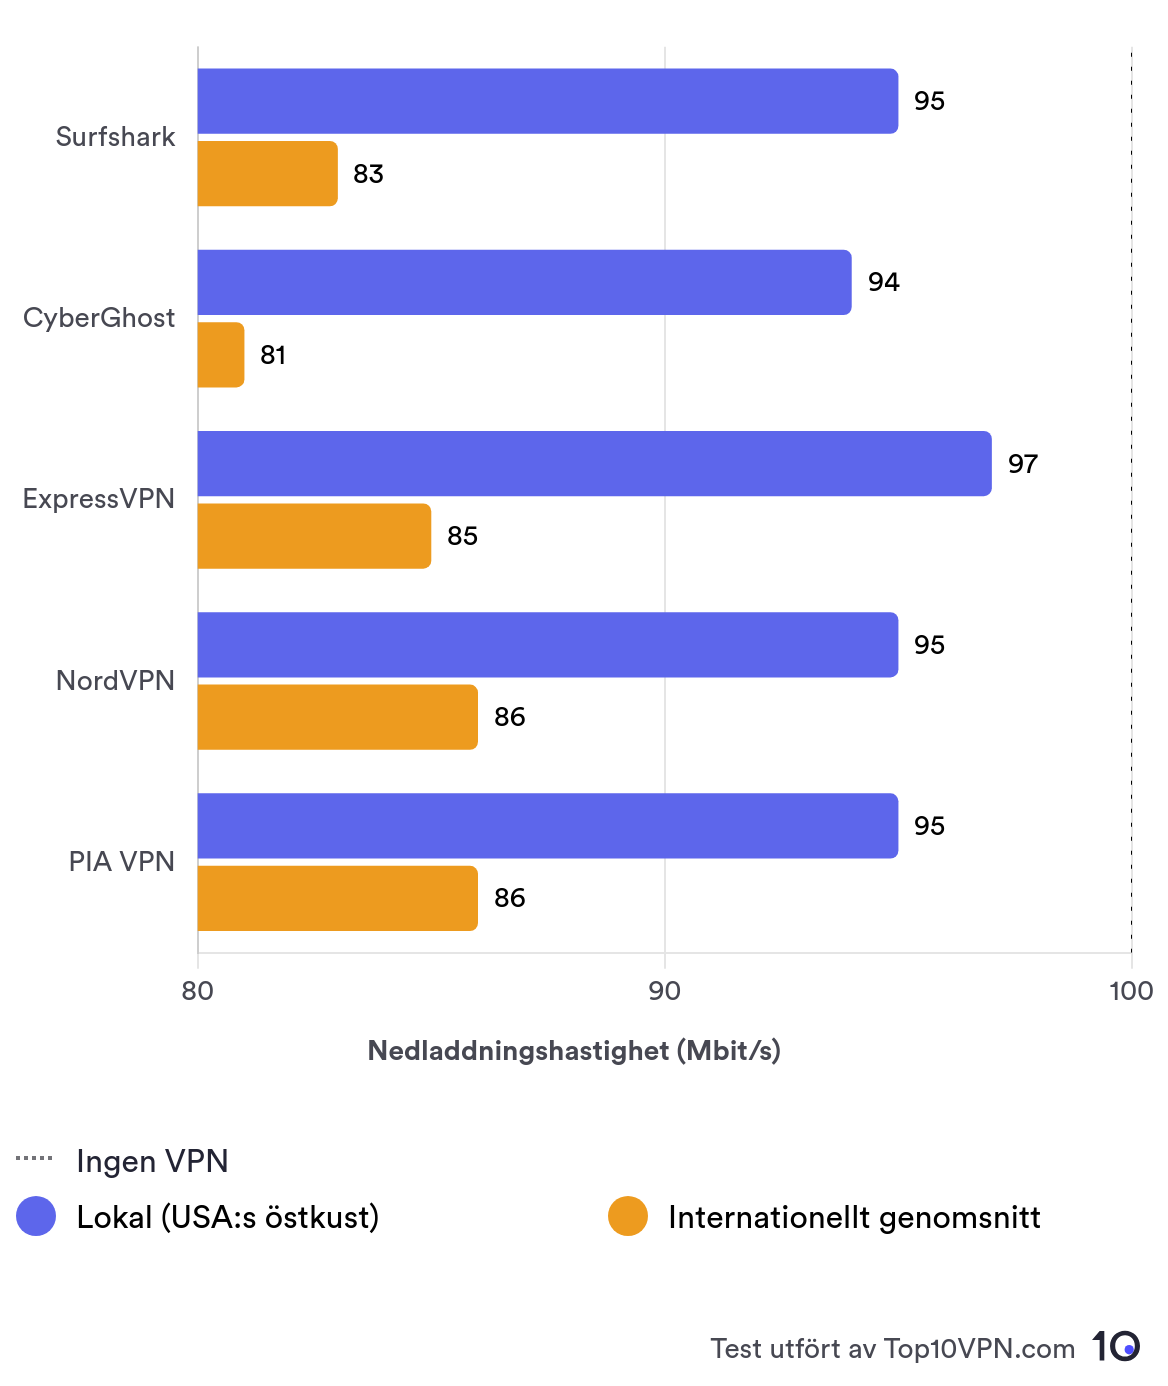 How CyberGhost compares to our top four VPNs both on local connections and in an average of their international connections. Its local speeds are strong, but internationally it lags behind the others.